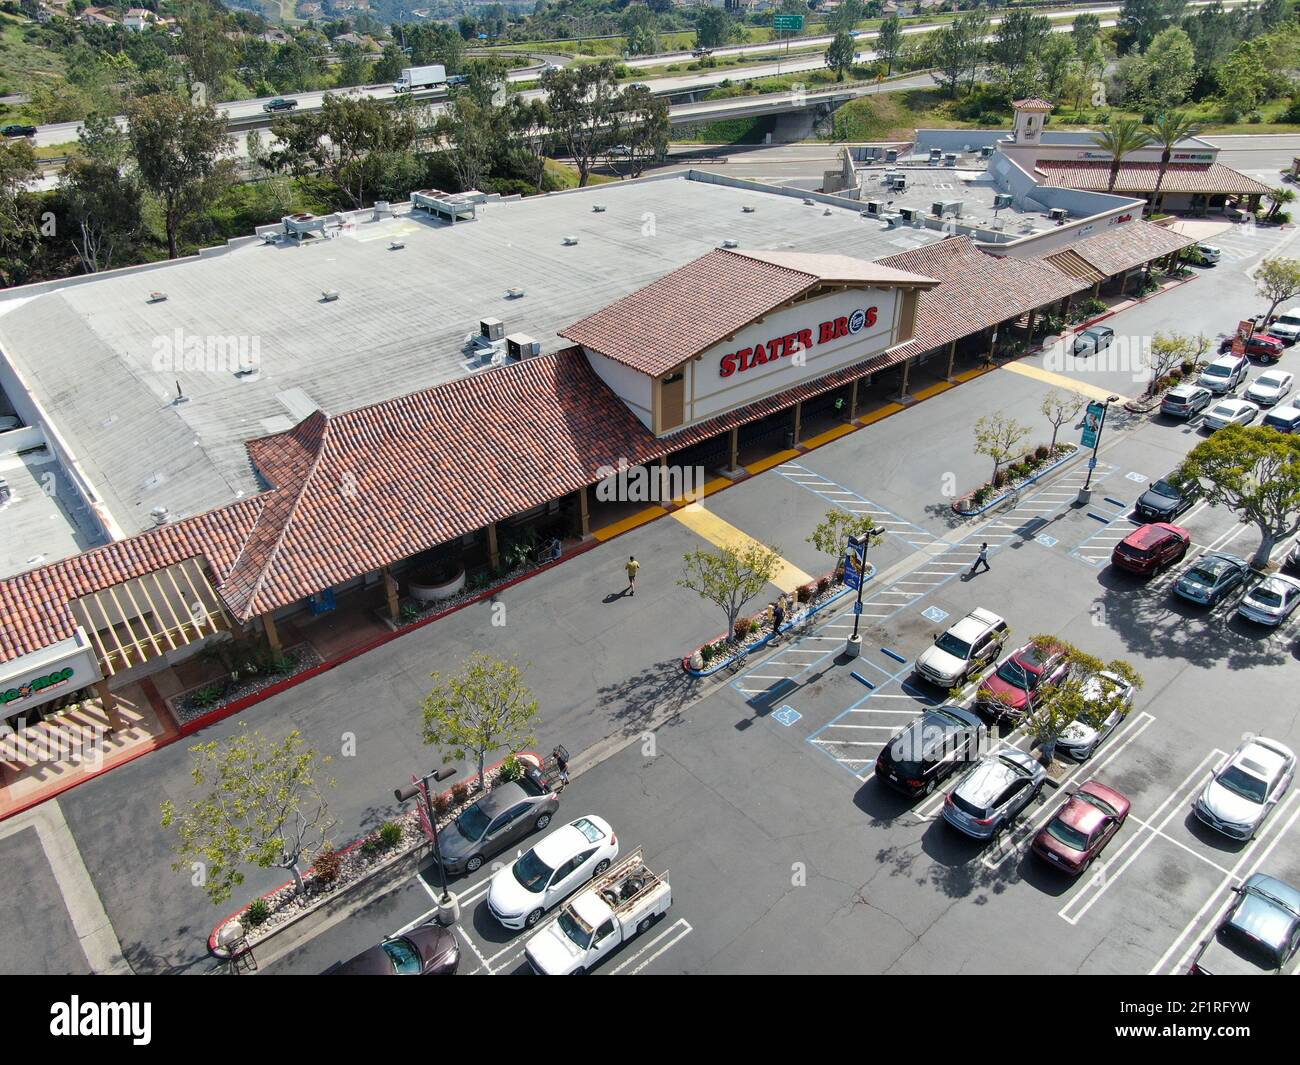 Aerial view of Stater Bros Grocery Store exterior and logo Stock Photo